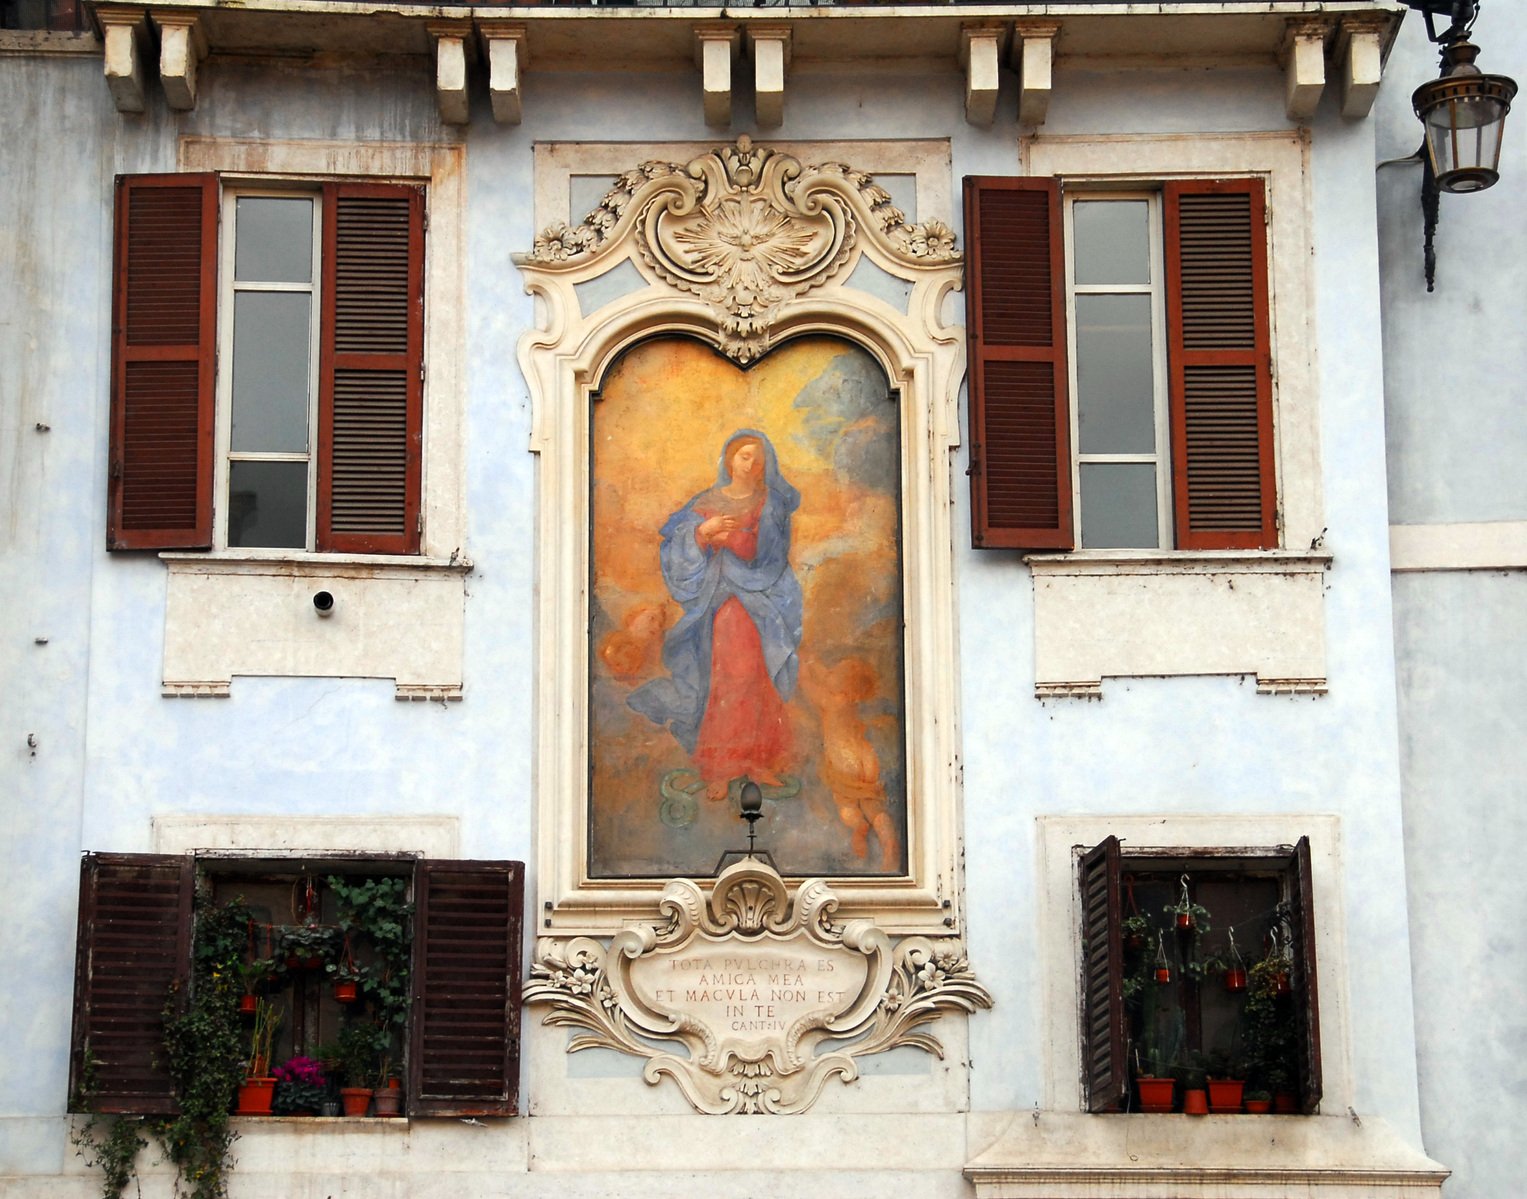 a painting above the window is on a building